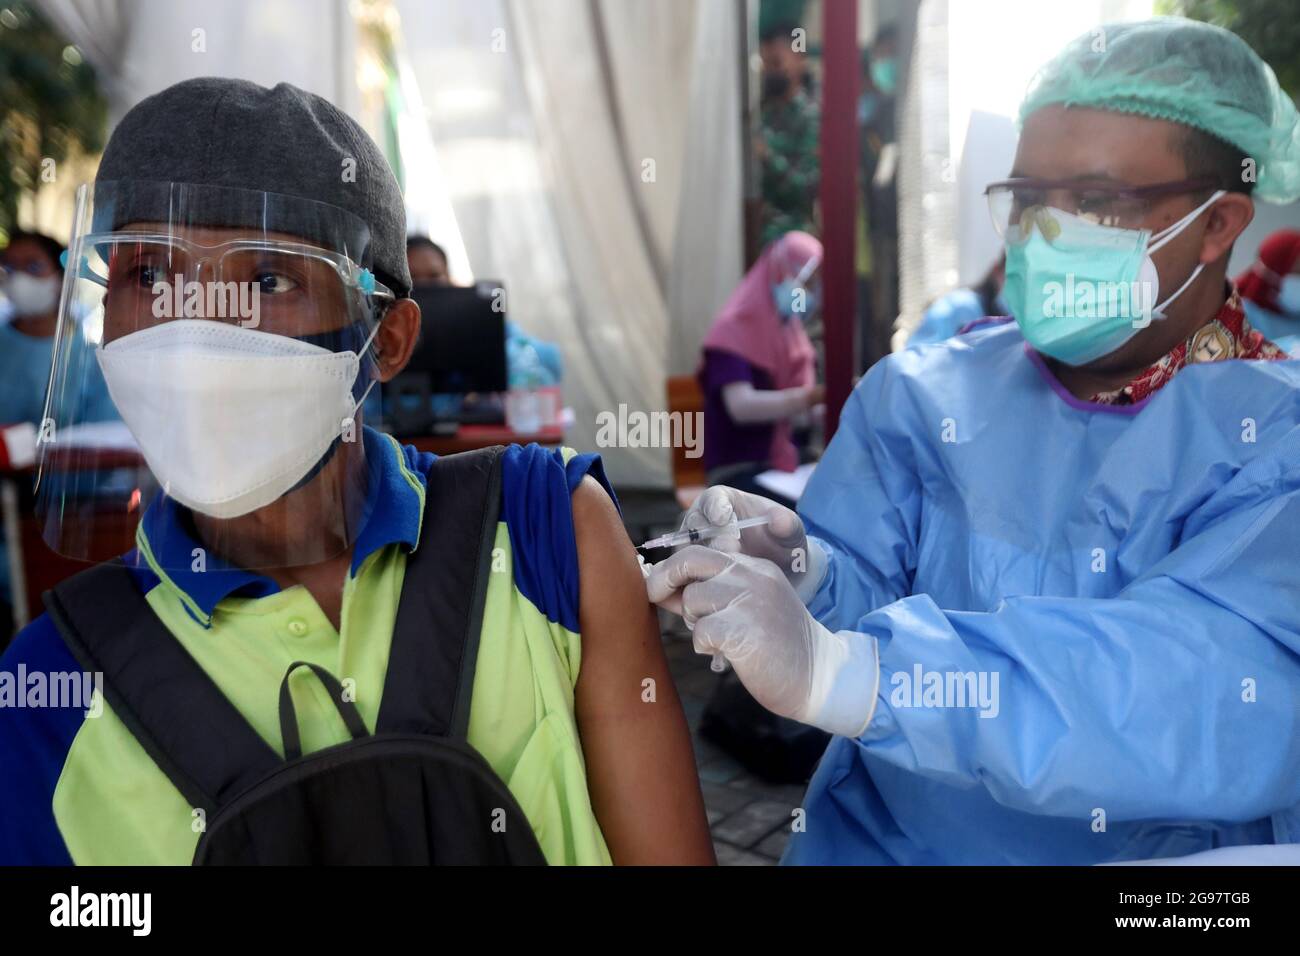 Sidoarjo, Indonesia. 24th July, 2021. A Laborer receives the Sinovac Covid-19 vaccine during a vaccination for Laborer in Sidoarjo, East Java, Indonesia, on July 24, 2021. (Photo by Boy Slamet/INA Photo Agency/Sipa USA) Credit: Sipa USA/Alamy Live News Stock Photo